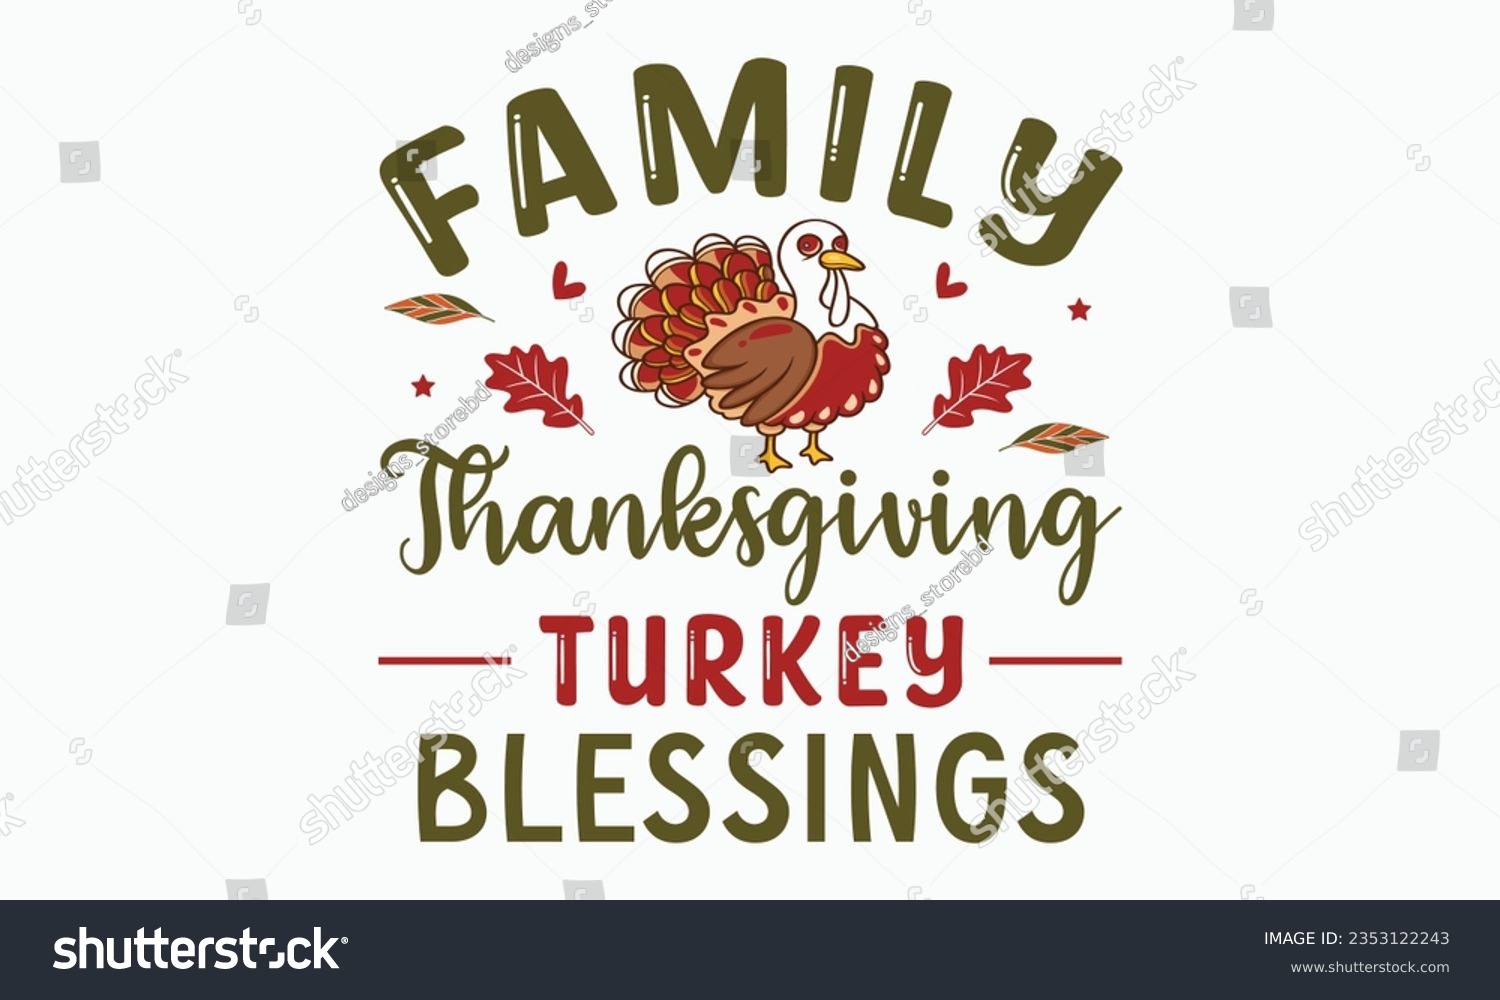 SVG of amily thanksgiving turkey blessings svg, Fall svg, thanksgiving svg bundle hand lettered, autumn , thanksgiving svg, hello pumpkin, pumpkin vector, thanksgiving shirt, eps files for cricut, Silhouette svg